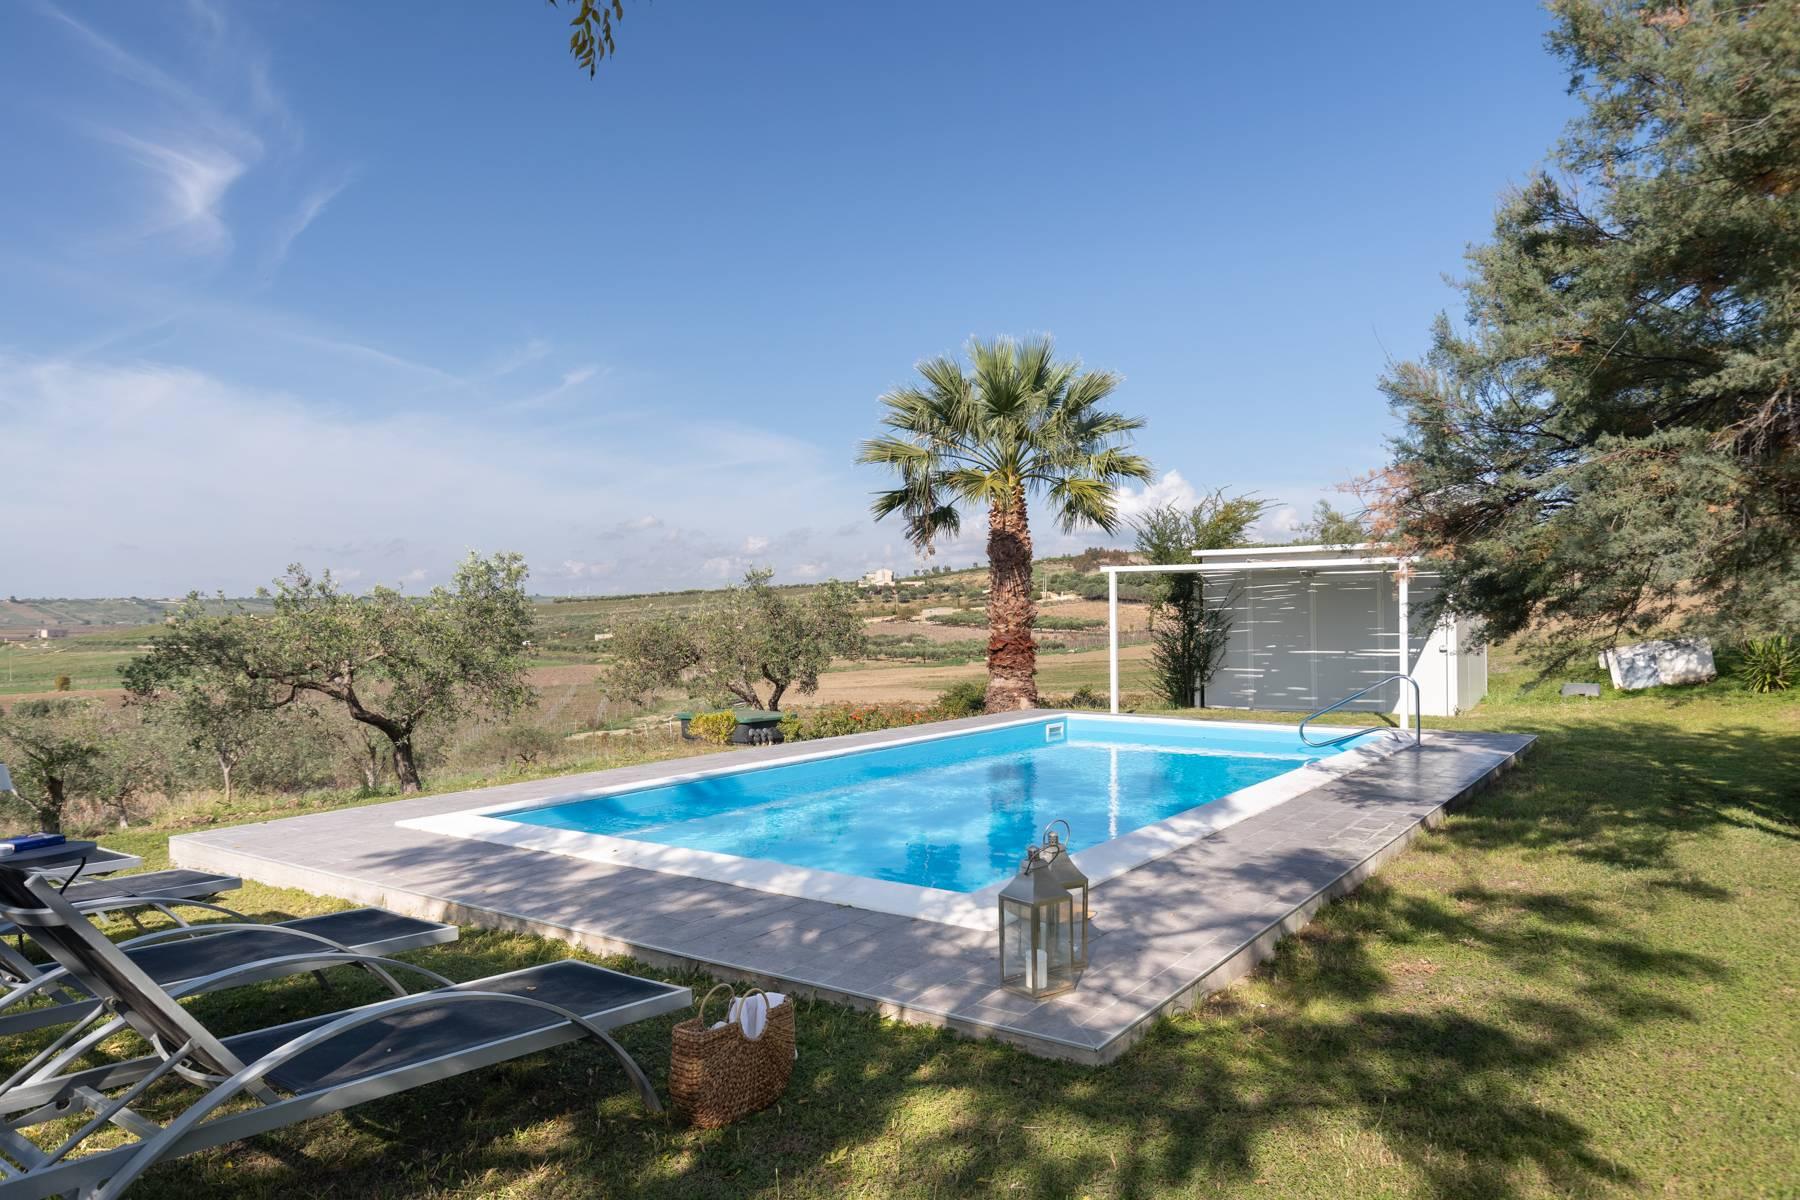 Villa with swimming pool 1km from the sea - 1